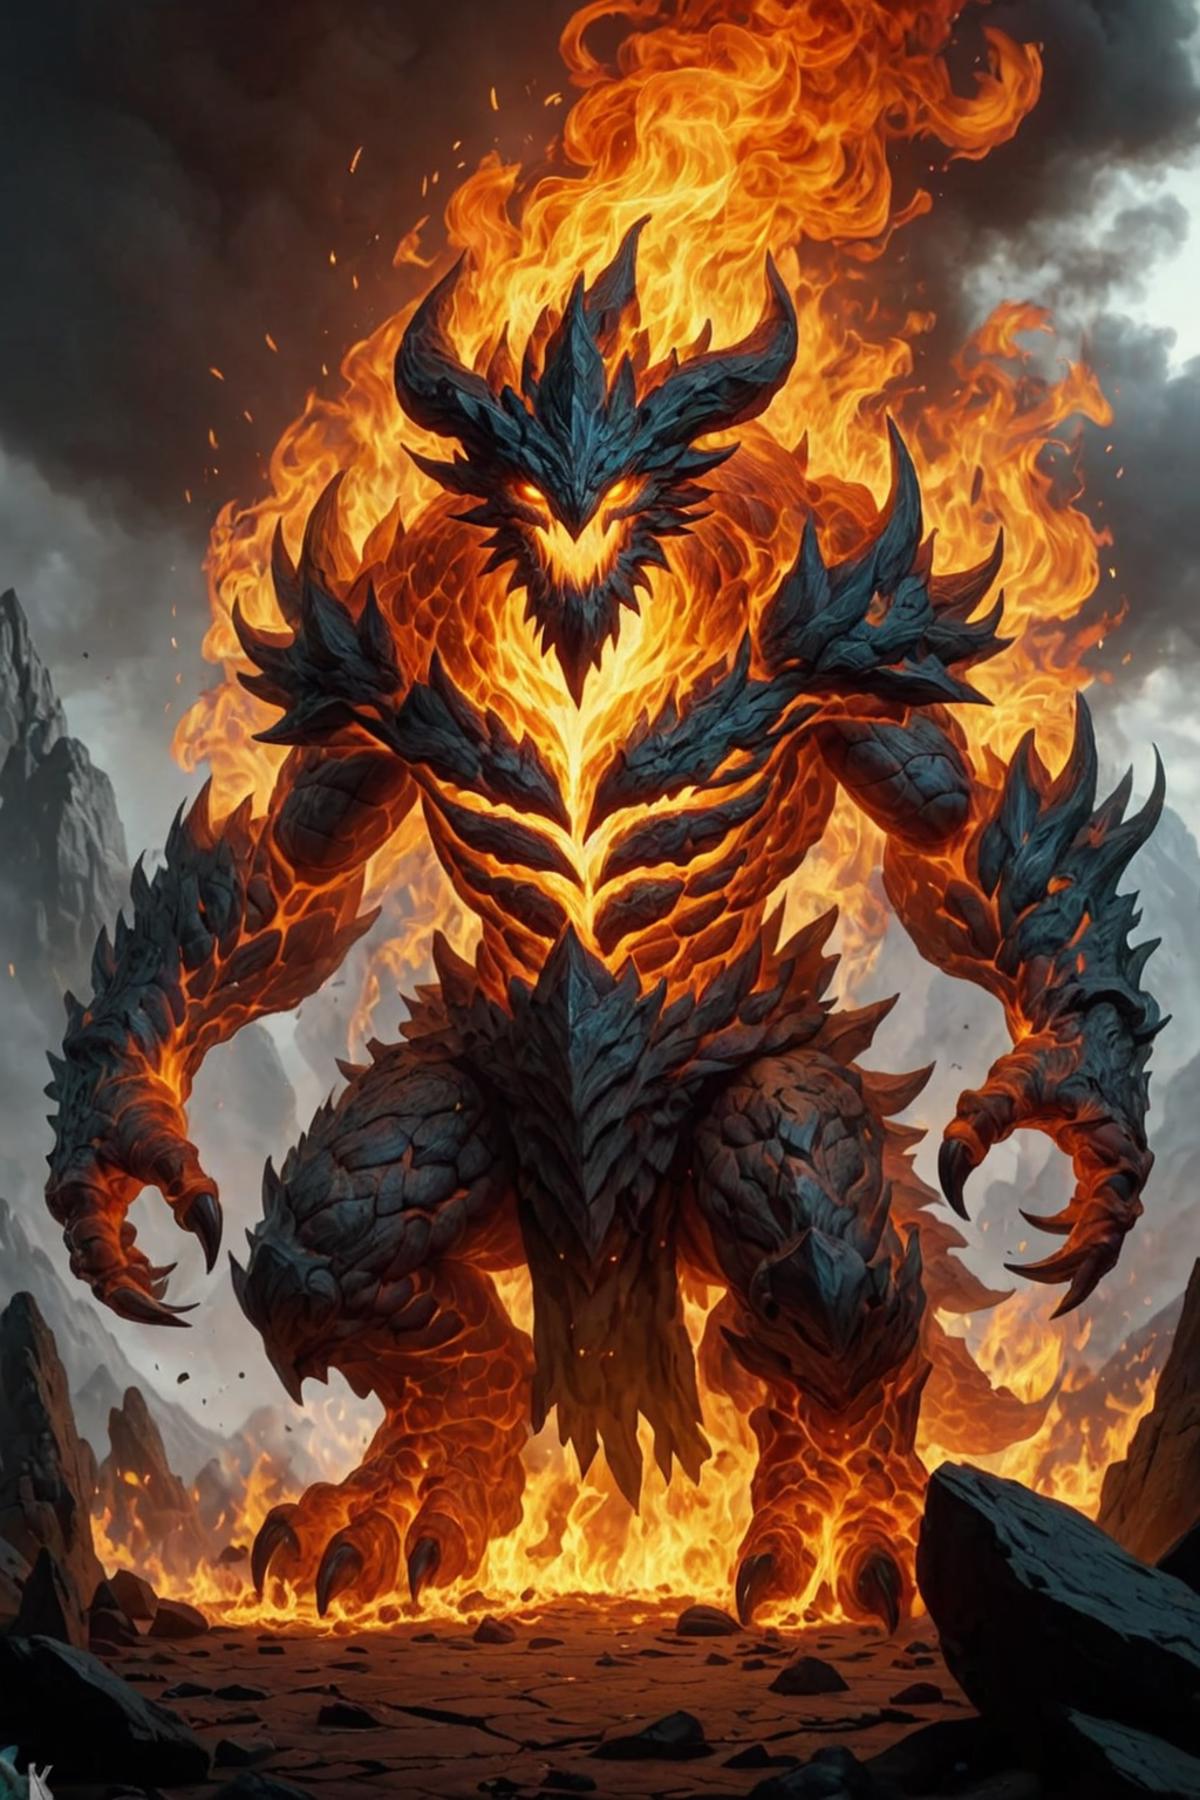 A fiery monster with horns and wings, standing on a rock and surrounded by fire.